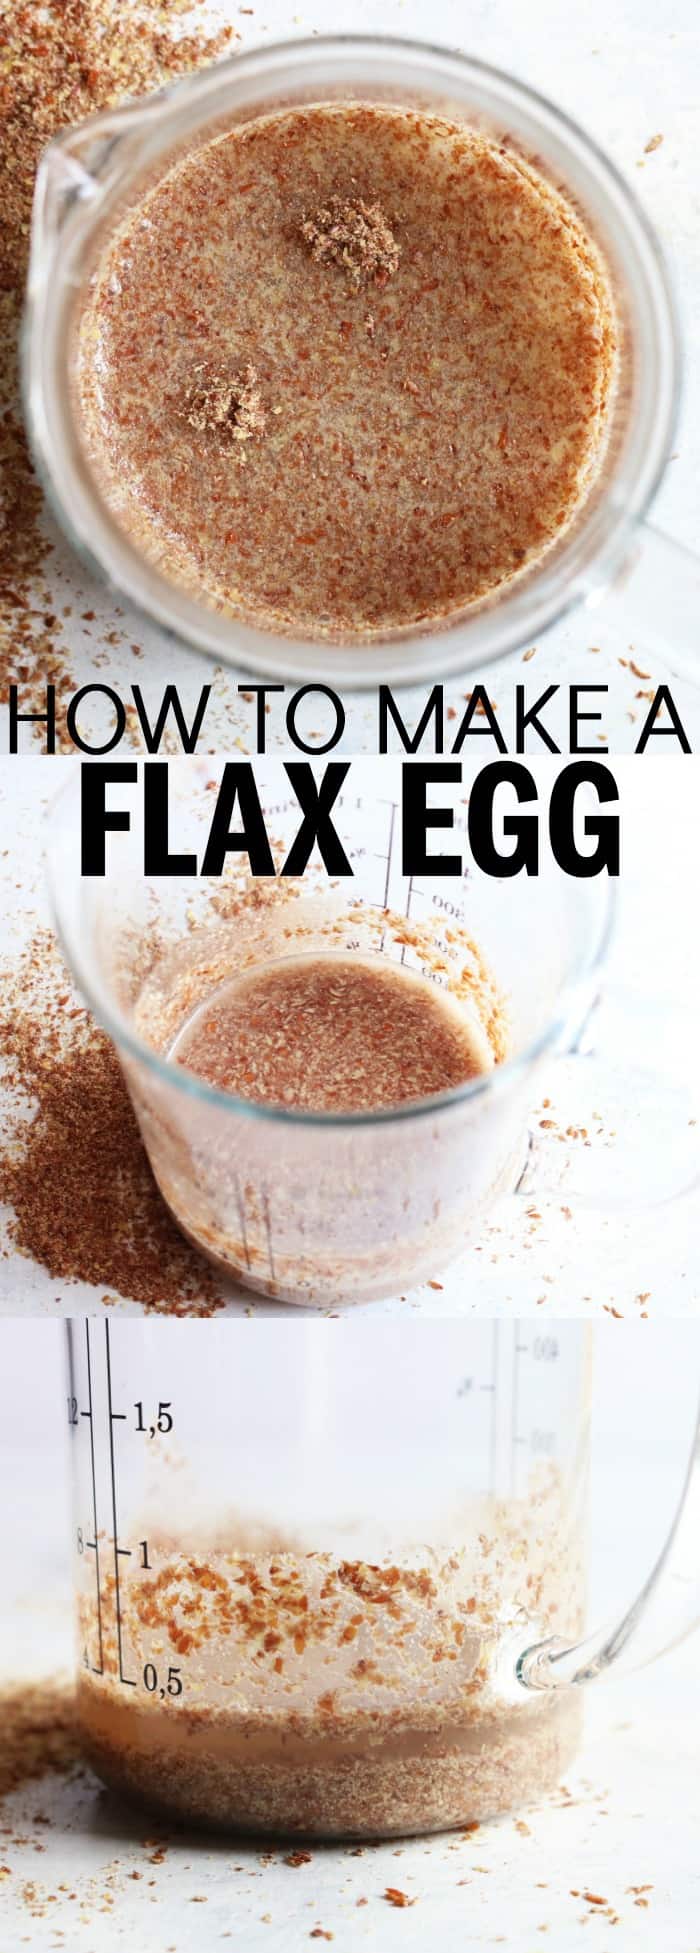 So excited to finally share HOW TO MAKE: A FLAX EGG on the blog! Whether you're avoiding eggs, or just want to add extra nutrients into your recipe, flax eggs are the perfect addition to your diet! thetoastedpinenut.com #thetoastedpinenut #howto #diy #homemade #flax #ground #meal #eggfree #flaxegg